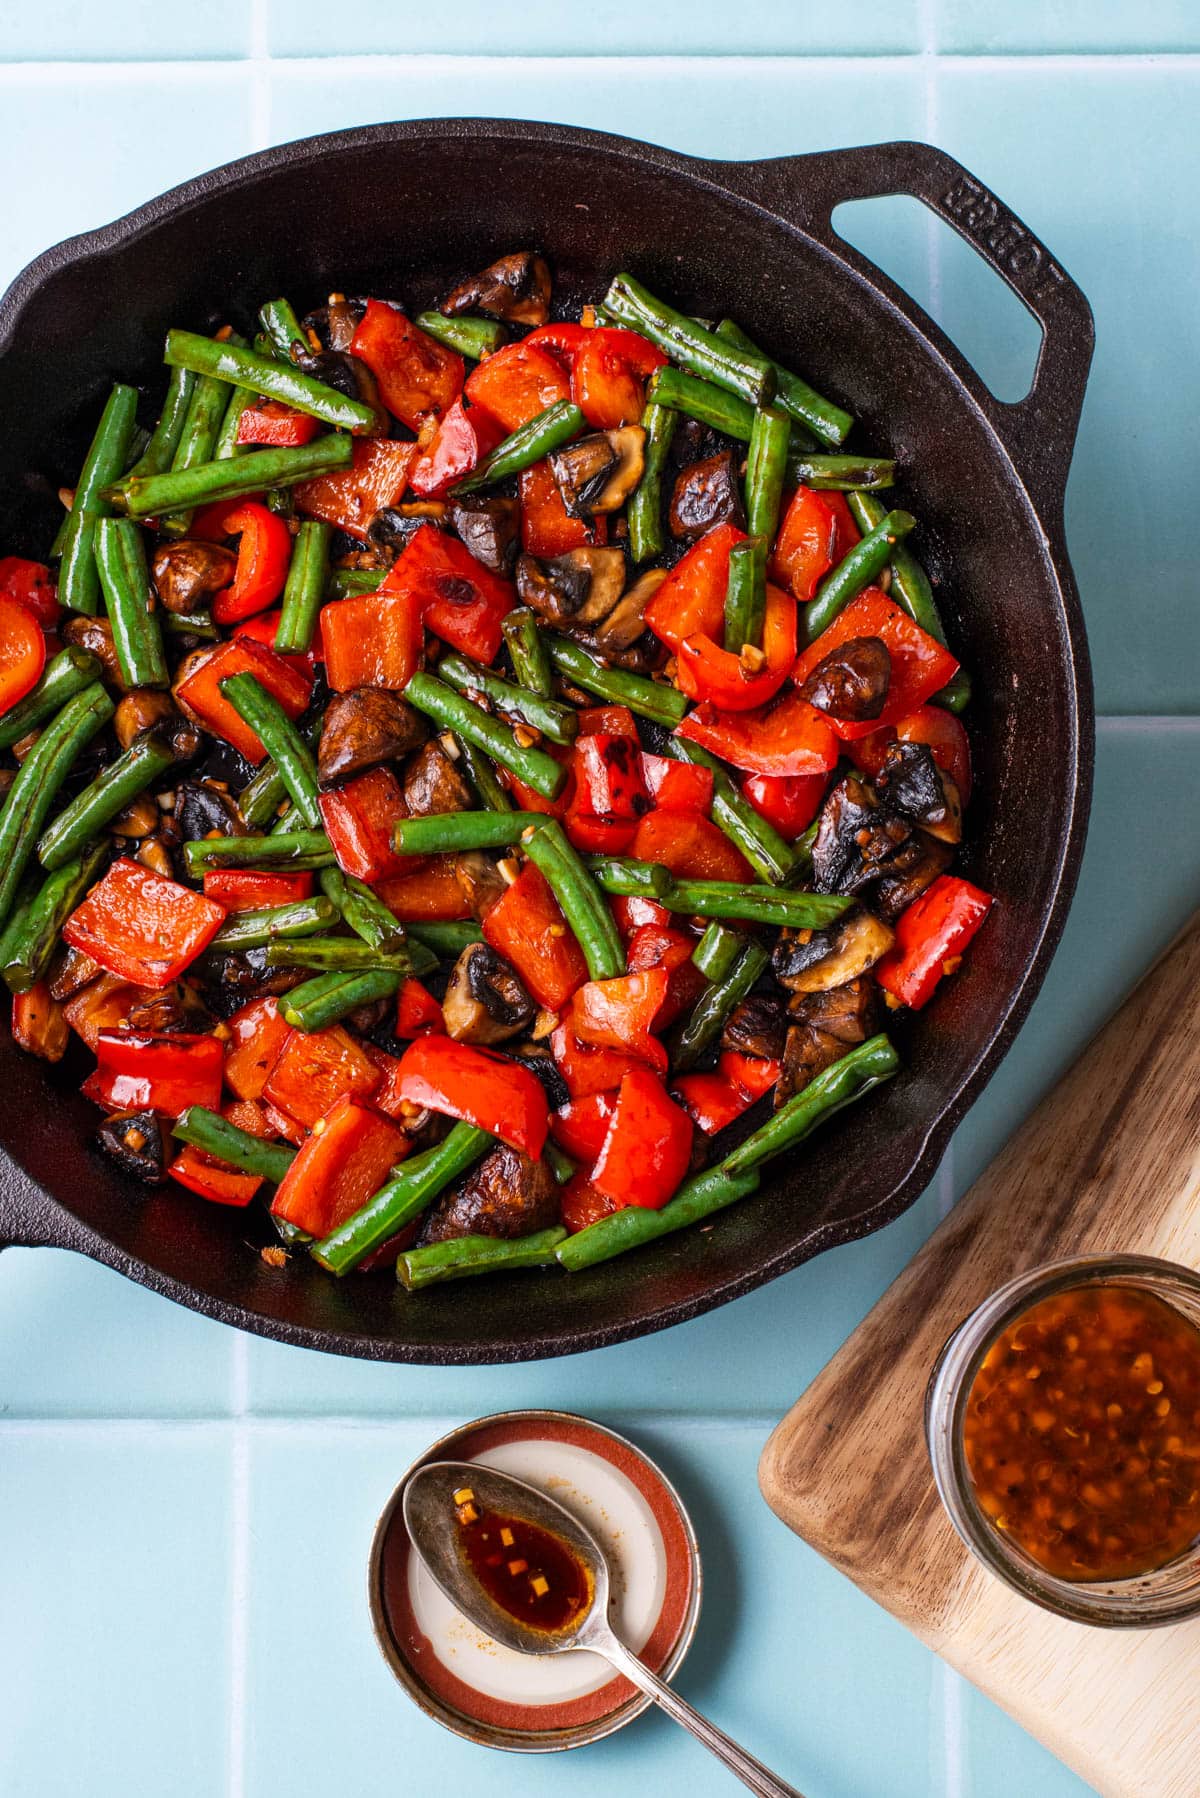 Stir fried vegetables in cast iron skillet with homemade sauce.